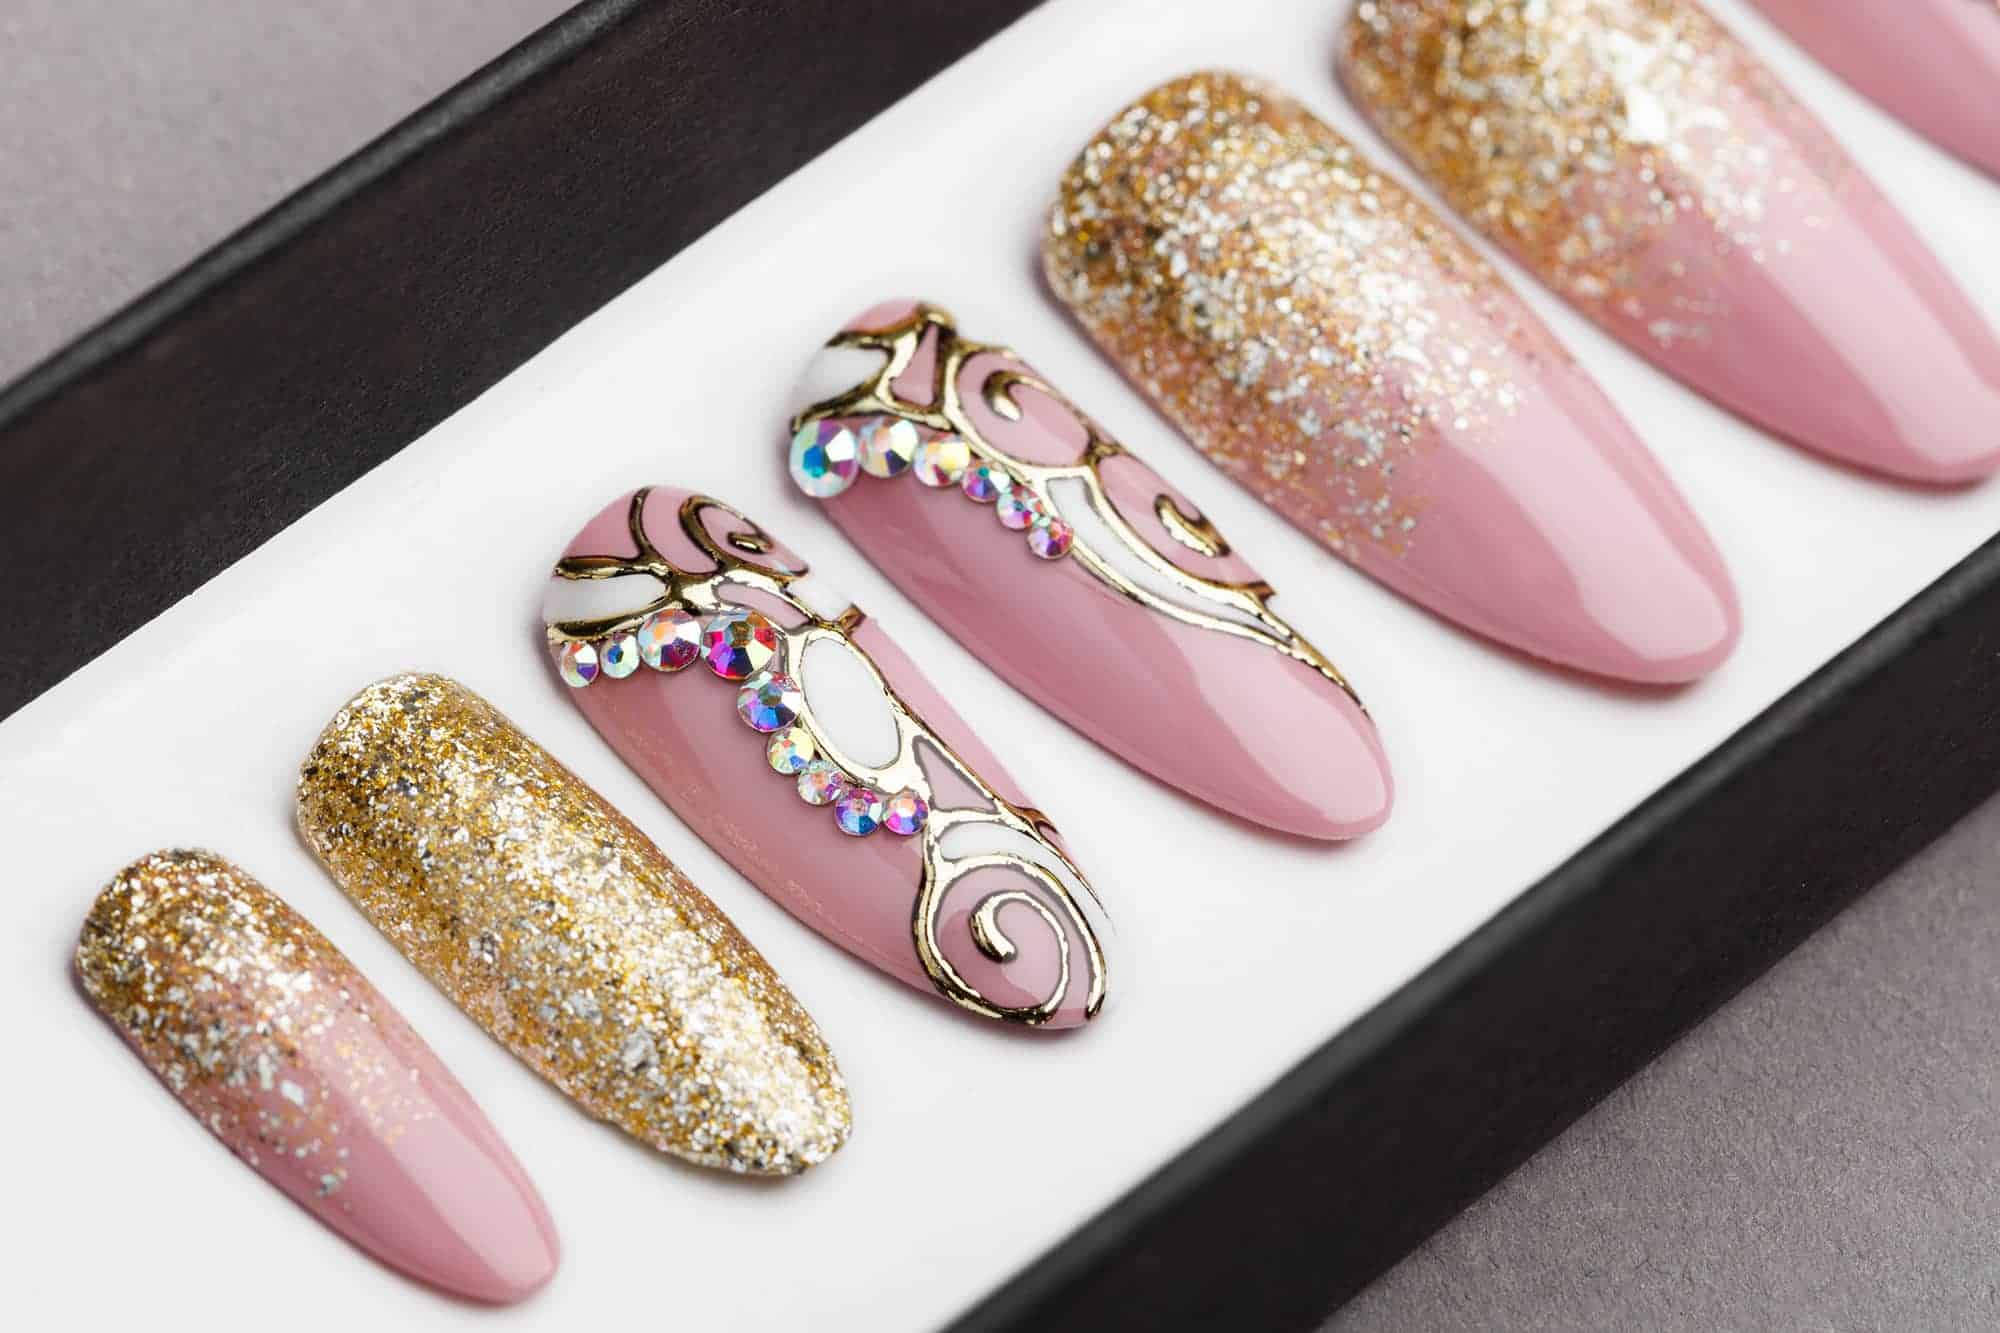 Pink and Gold Press on Nails with Swarovski | Fake Nails | False Nails | Golden tracery | Handpainted Nail Art | Glitters